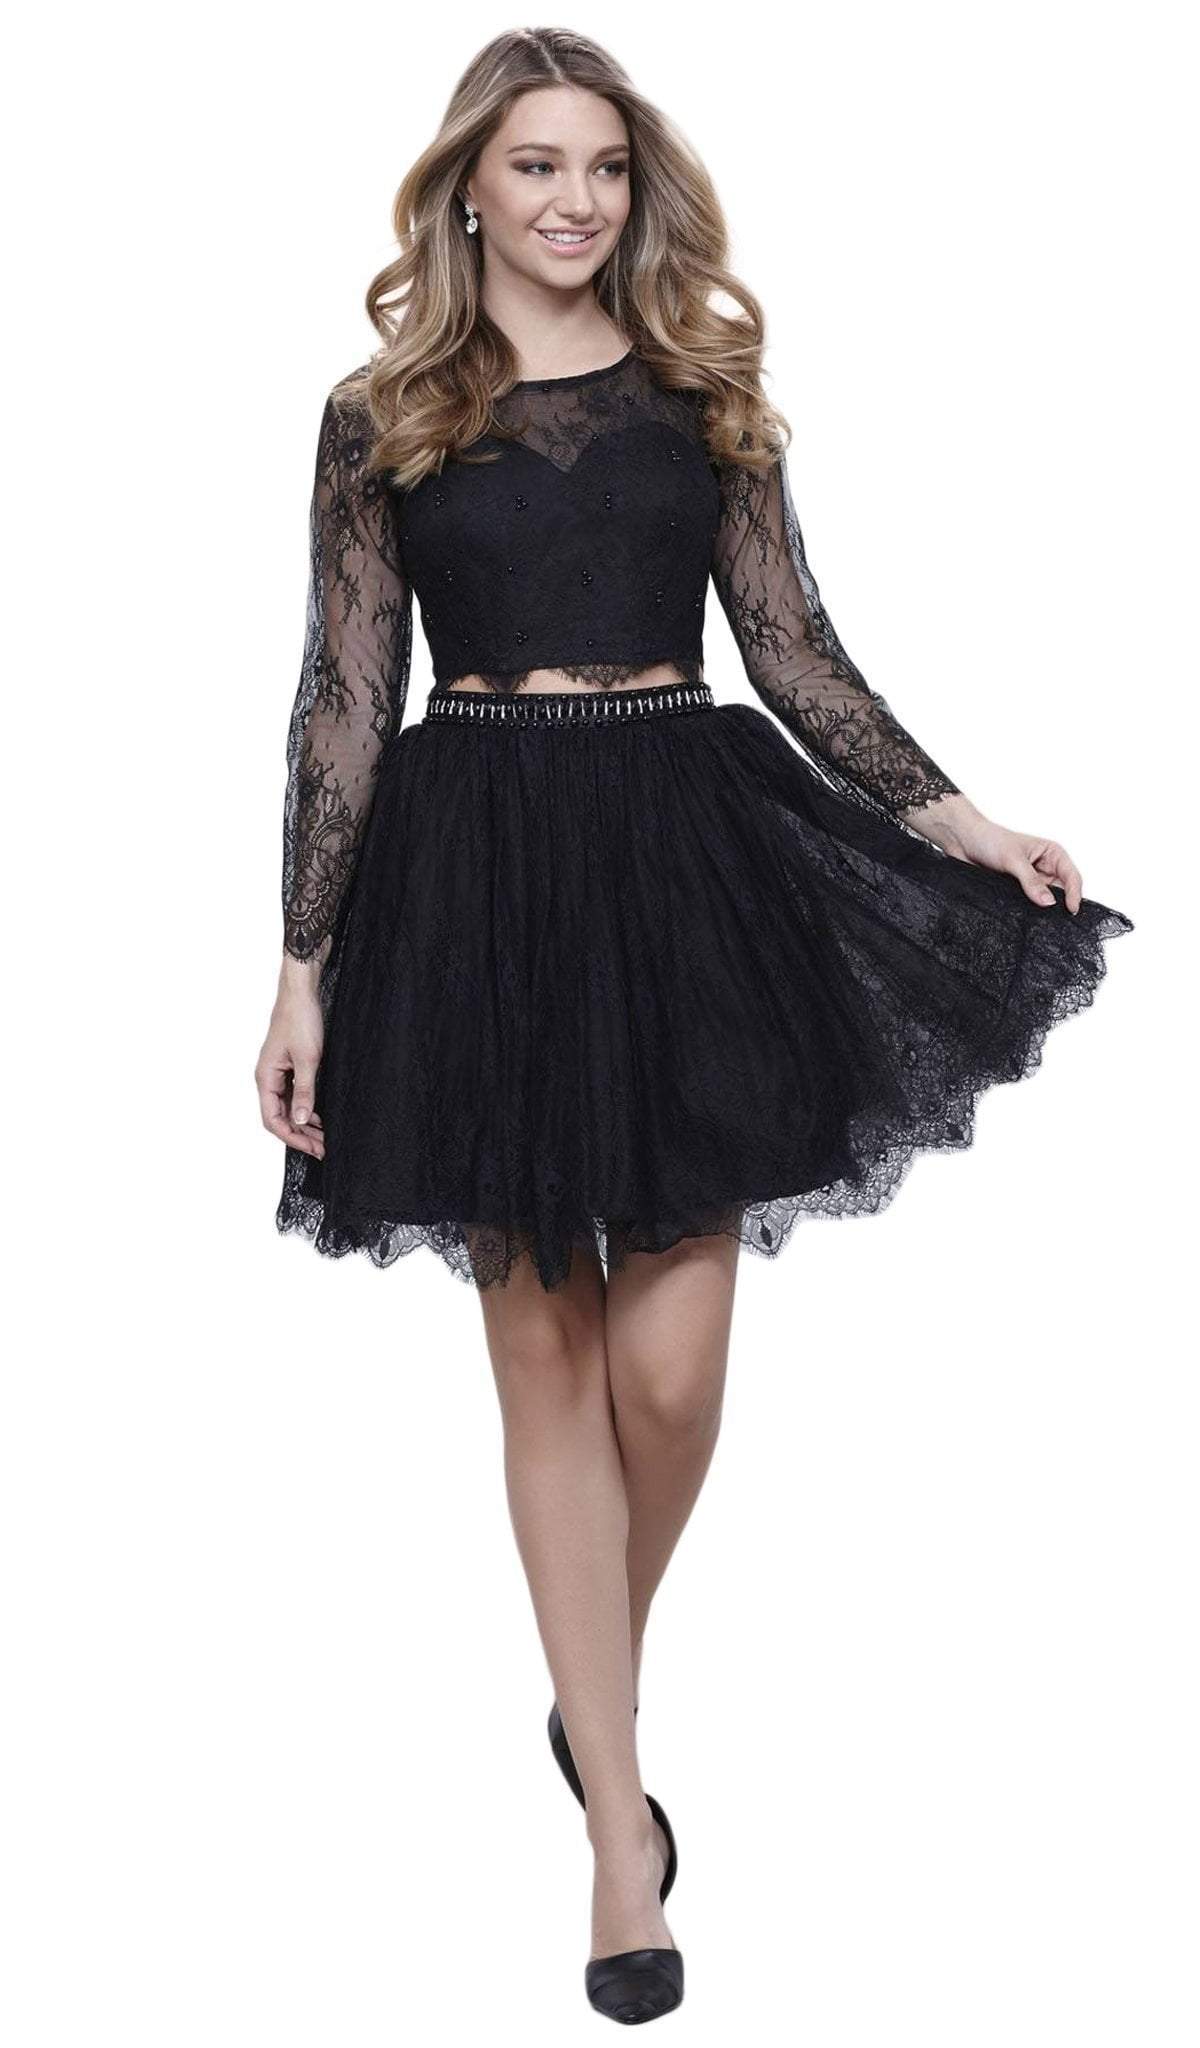 Nox Anabel - 6268 Two Piece Lace Long Sleeve Short Party Dress